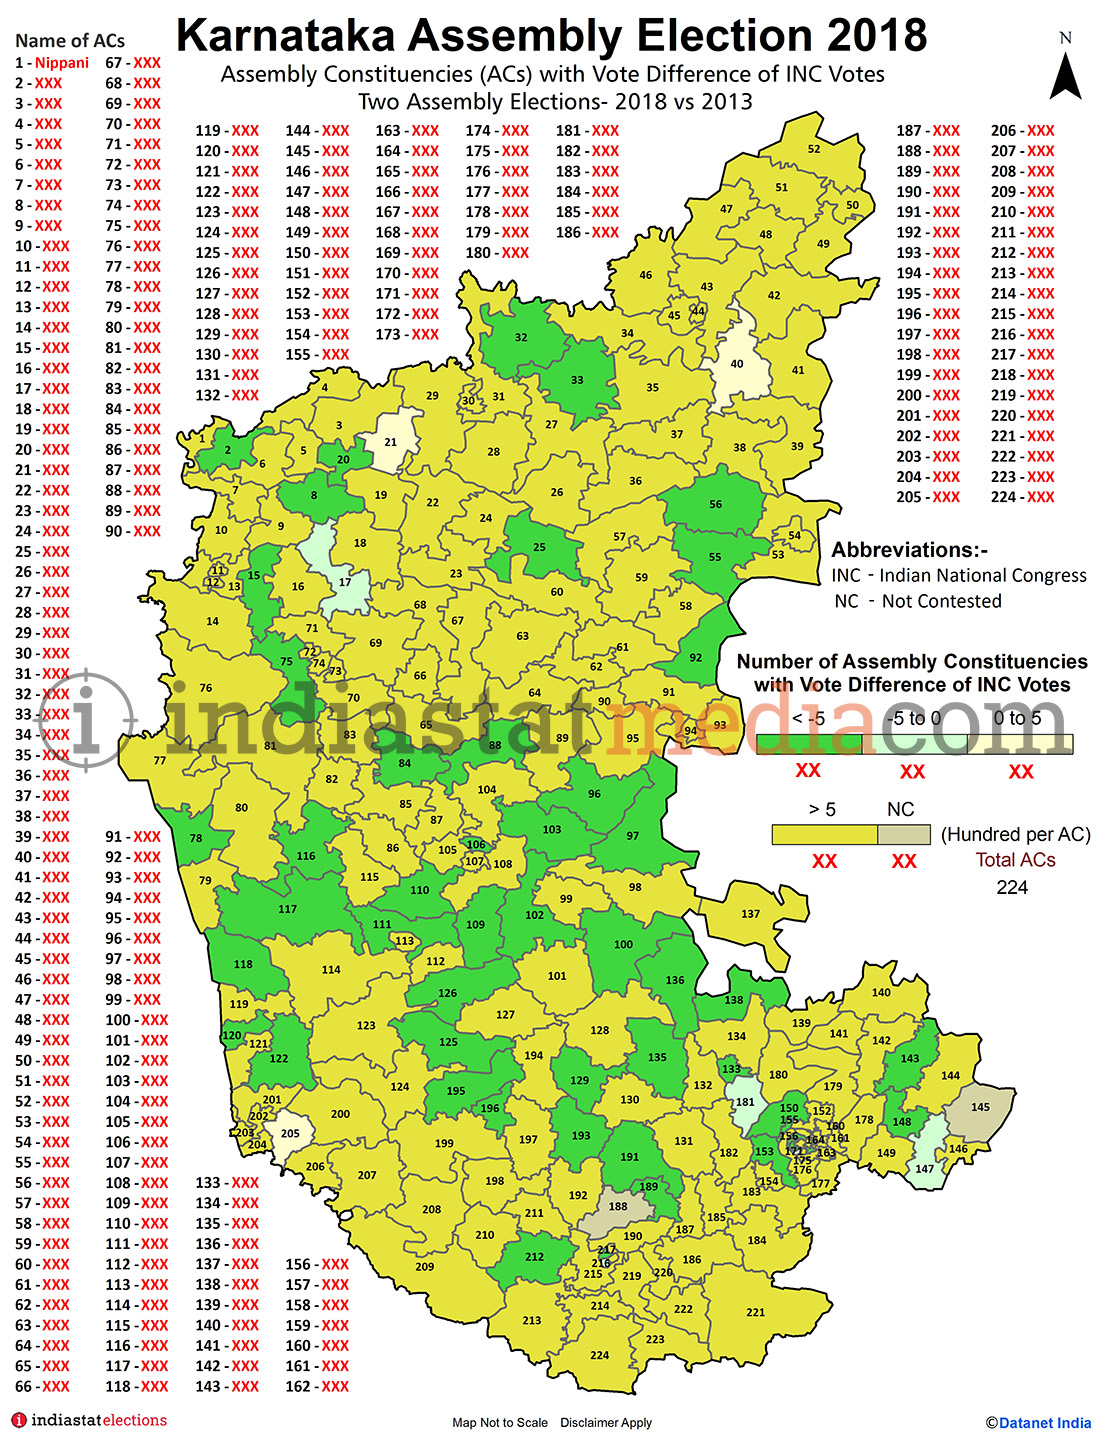 Assembly Constituencies with Vote Difference of INC Votes in Karnataka (Assembly Elections - 2013 & 2018)